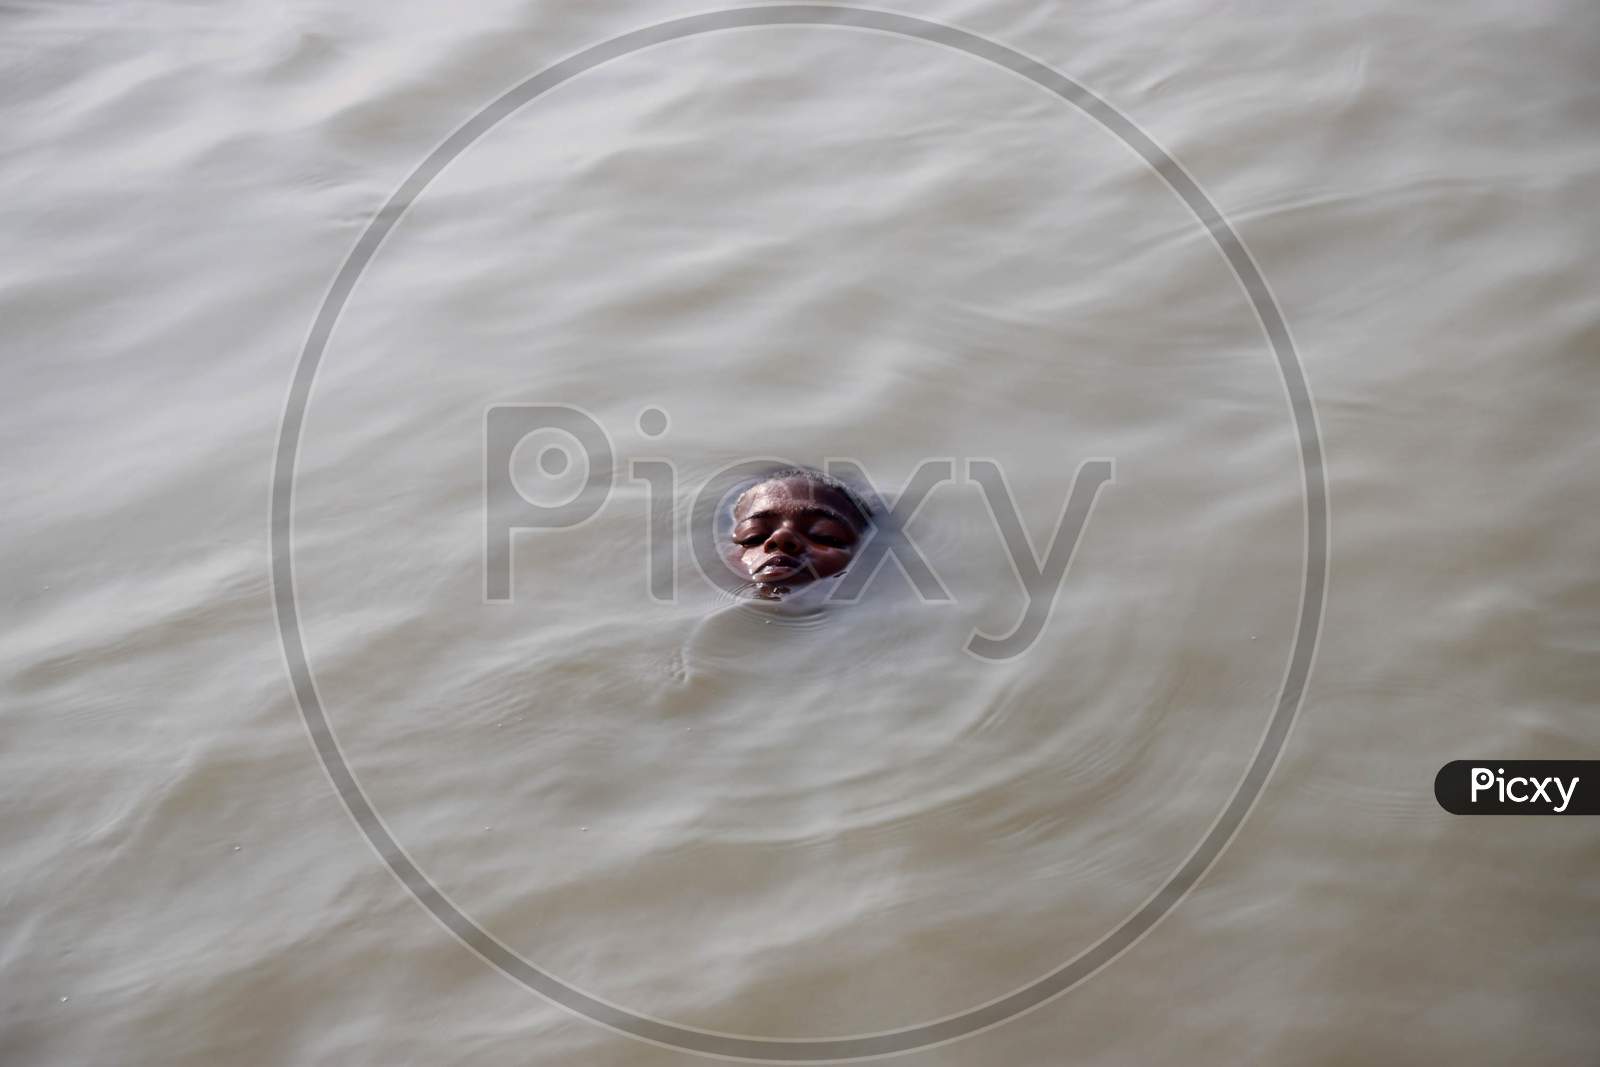 A Boy Jumps In The River Ganga To Beat The Heat On A Hot Day In Prayagraj, June 10, 2020.